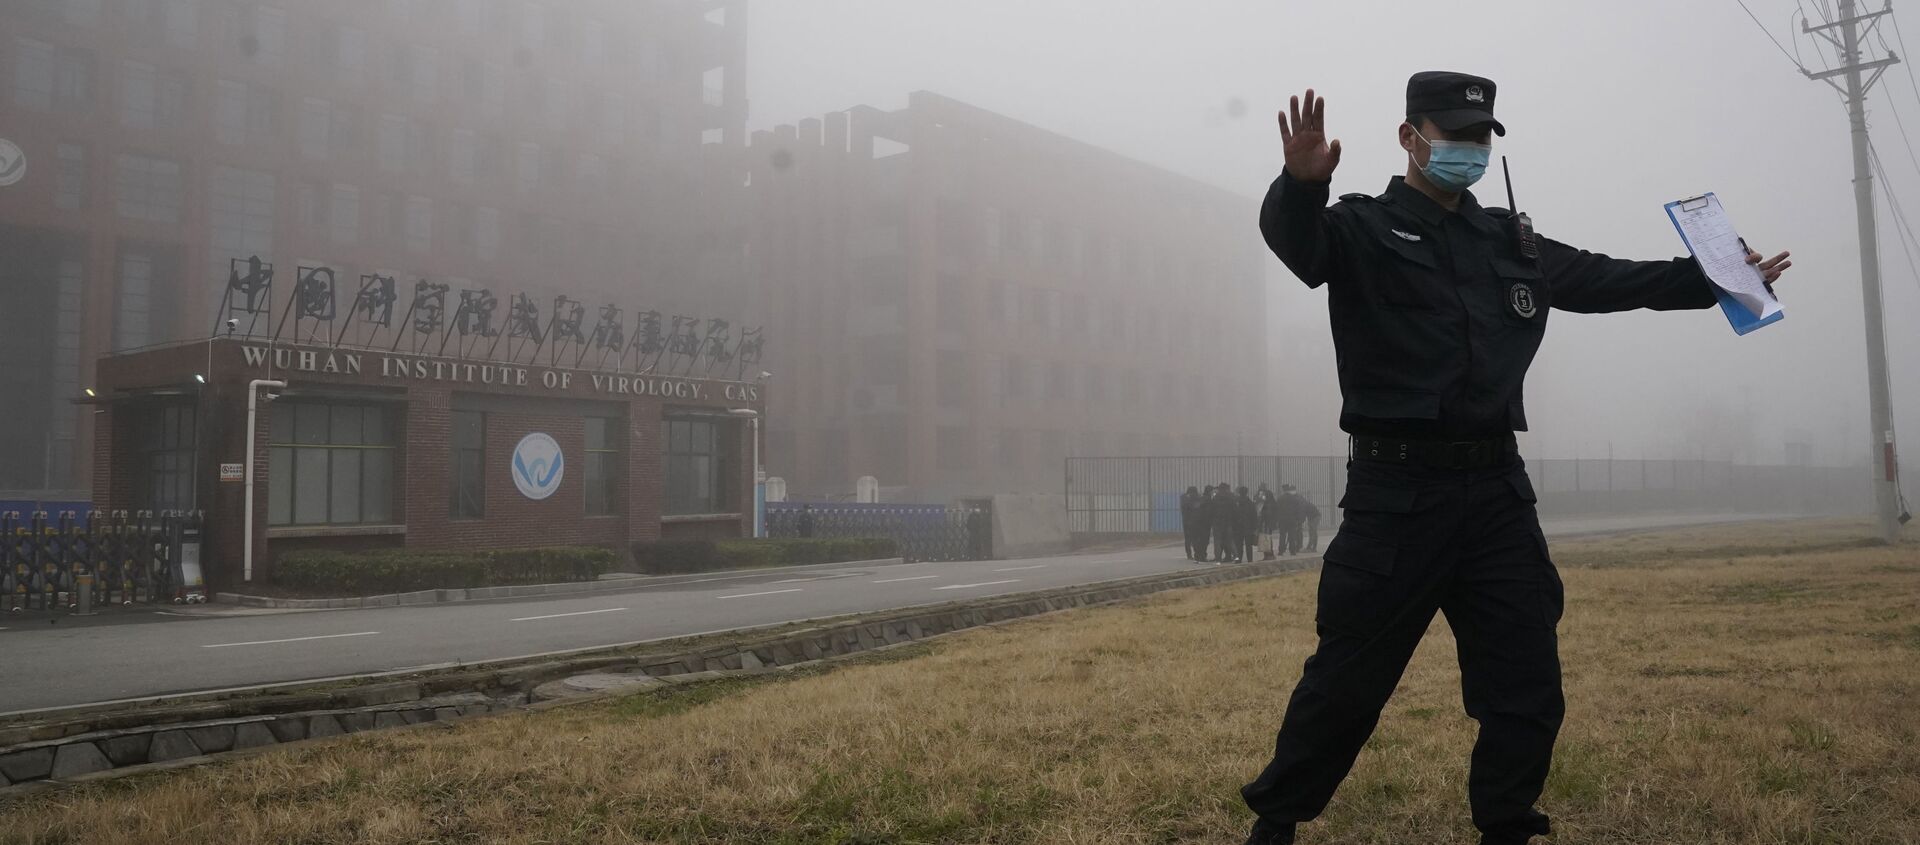 A security official moves journalists away from the Wuhan Institute of Virology after a World Health Organization team arrived for a field visit in Wuhan in China's Hubei province on Wednesday, Feb. 3, 2021 - Sputnik International, 1920